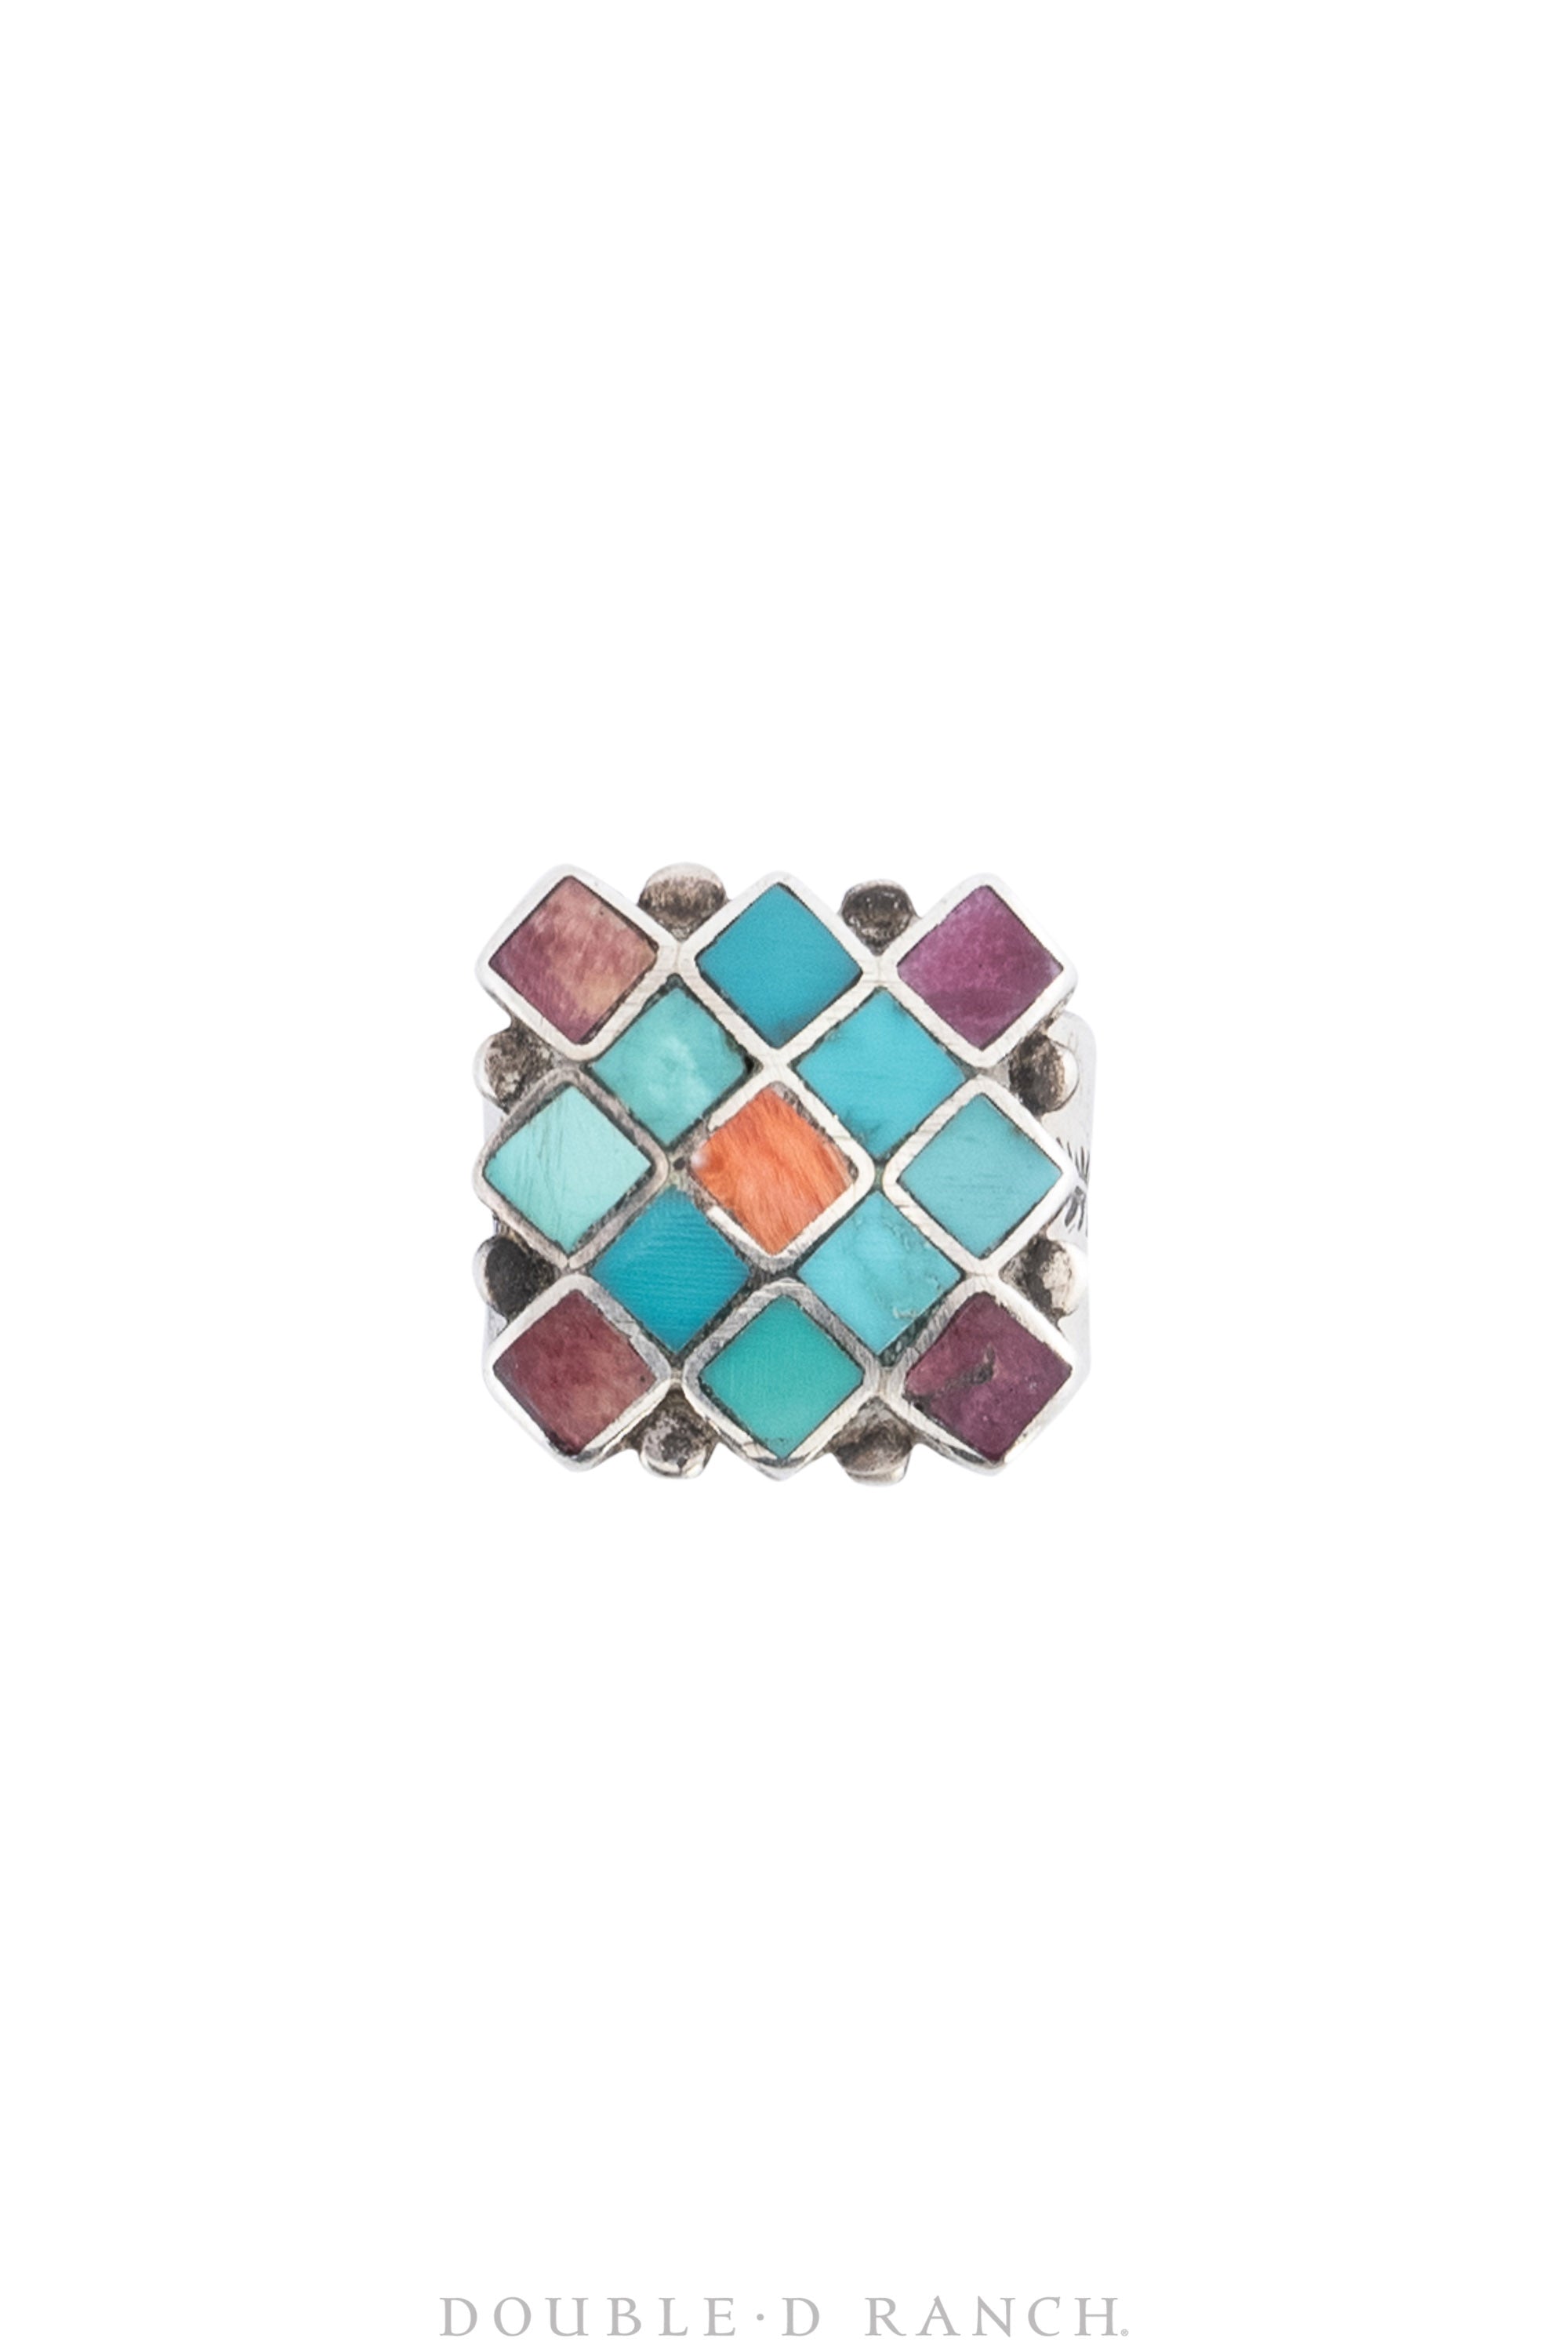 Ring, Inlay, Turquoise, Orange Spiny Oyster, Purple Spiny Oyster, 777